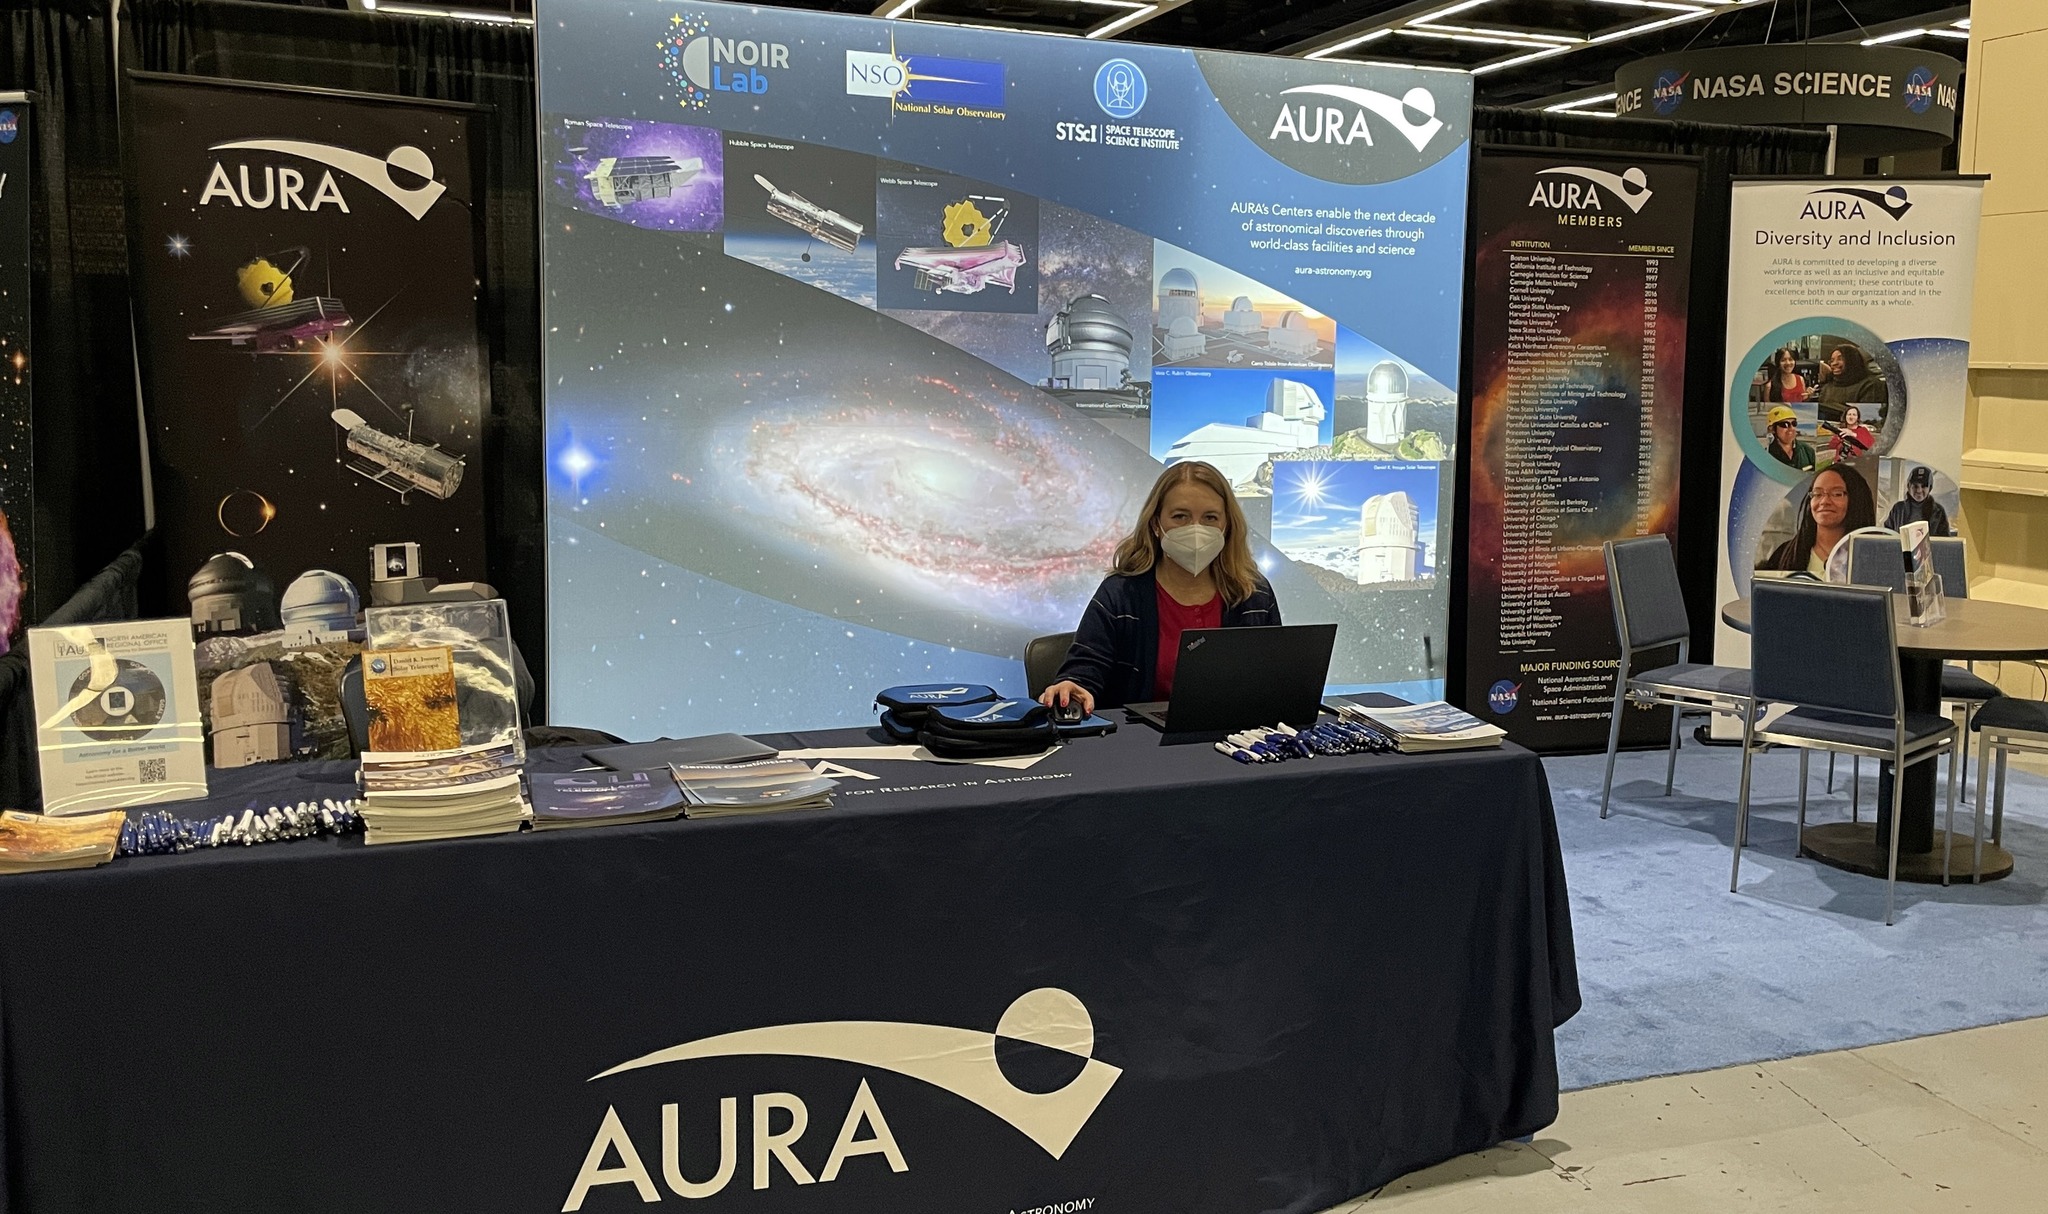 About - AURA Astronomy